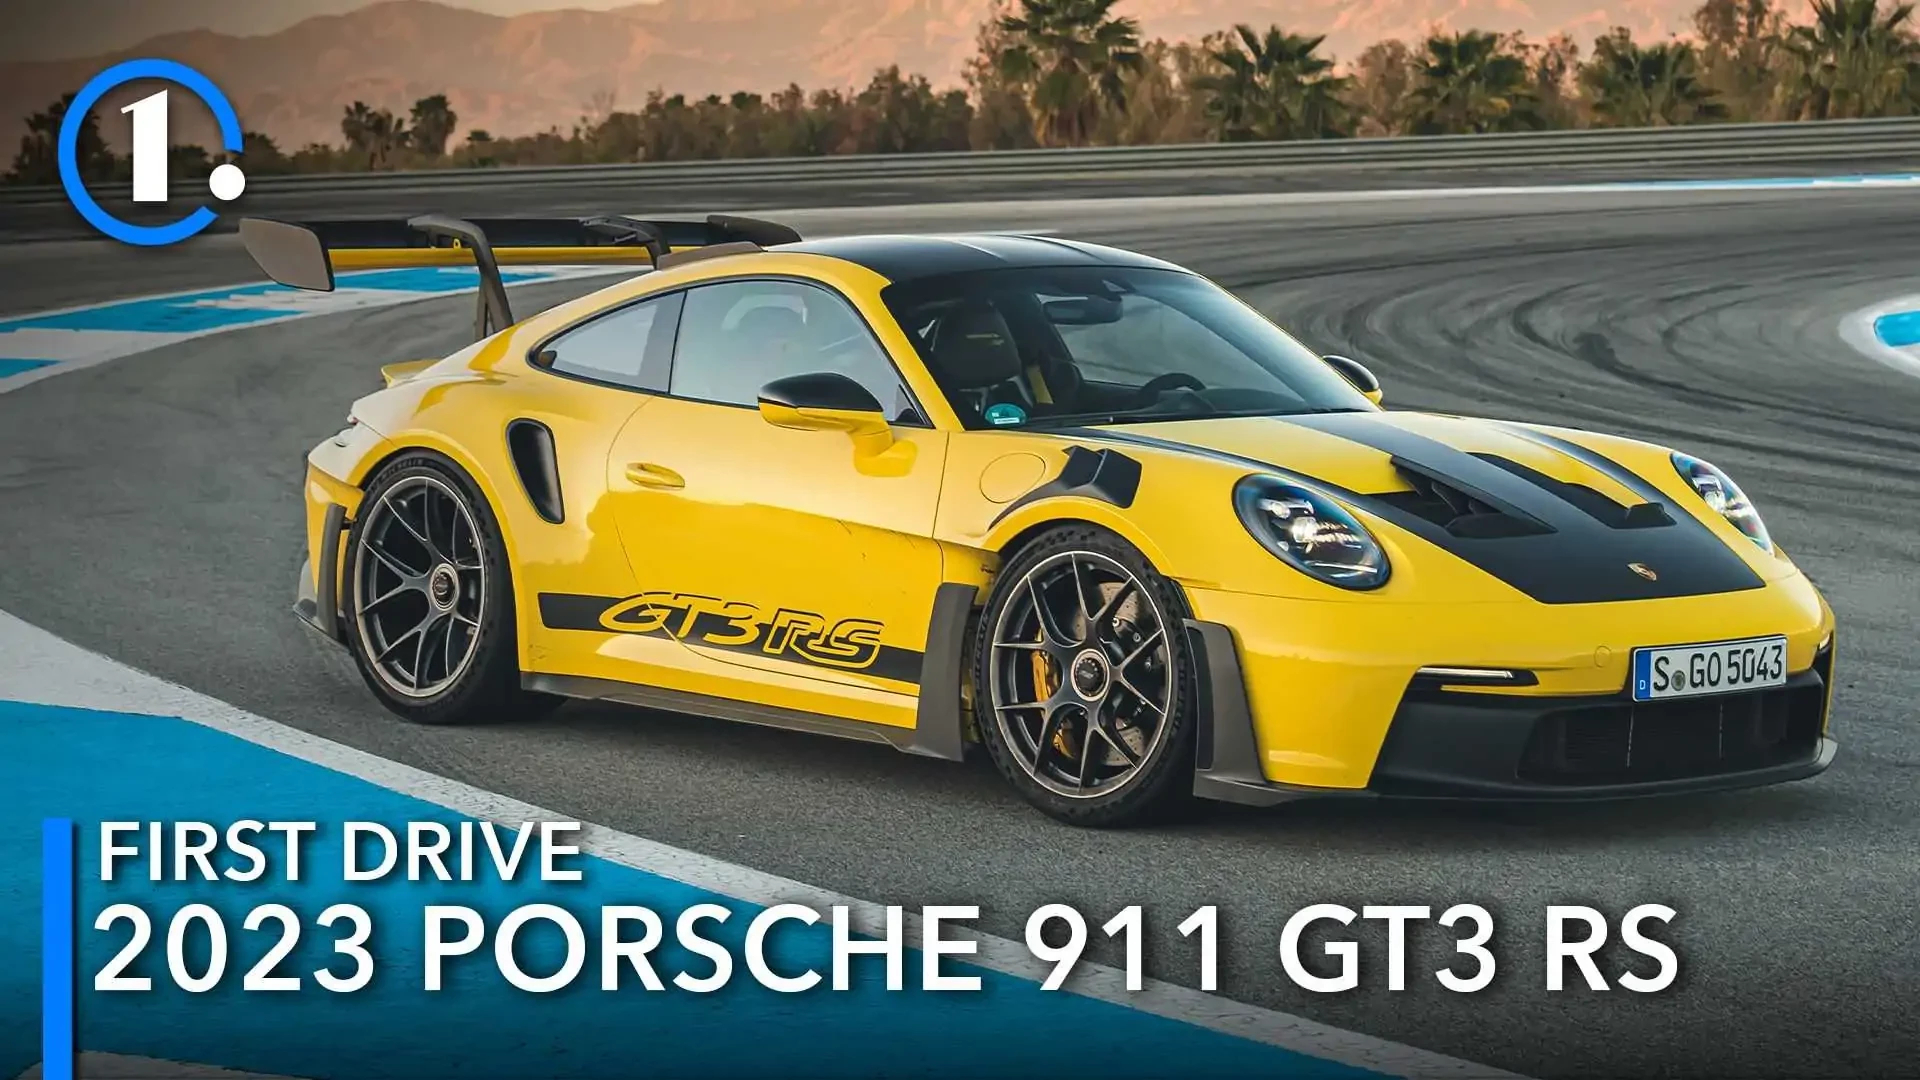 2023 Porsche Gt3 Rs 0 60 Price, Design and Review